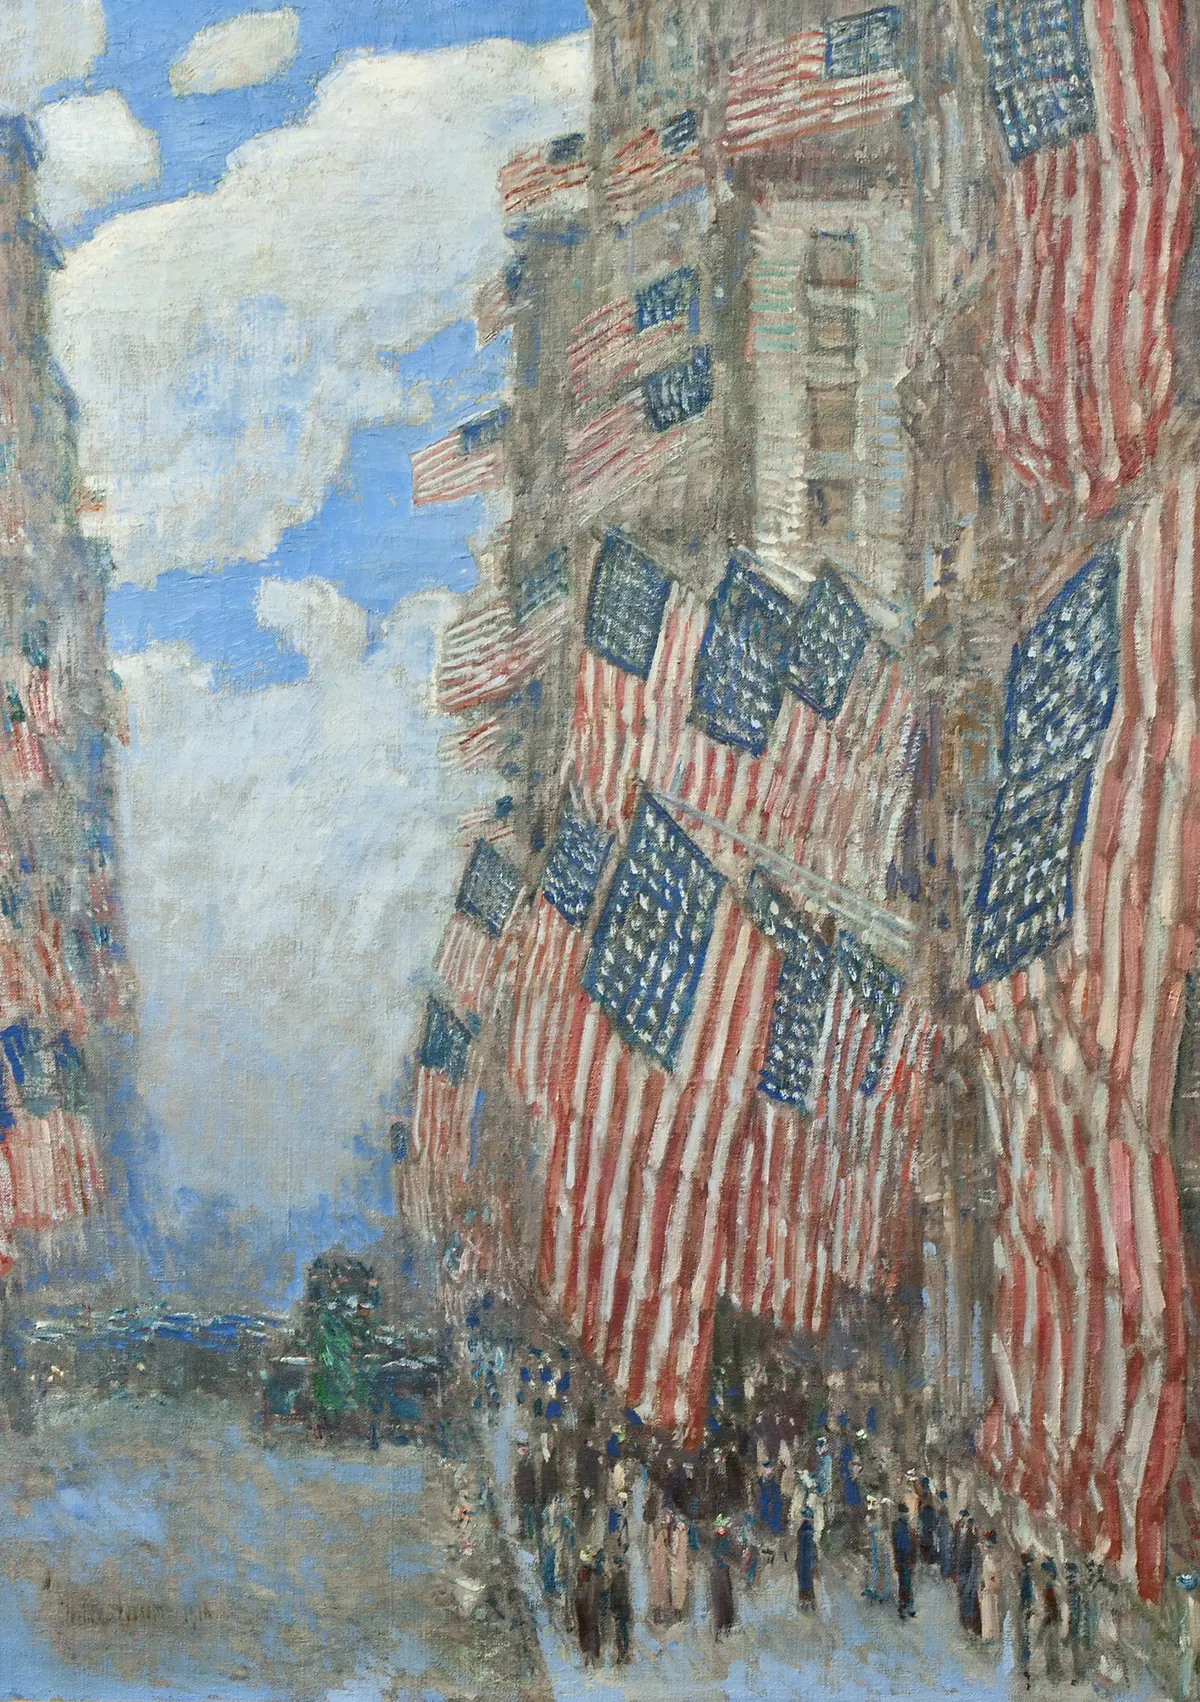 4 Temmuz 1916 (orig. "The Fourth of July, 1916") by Frederick Childe Hassam - 1916 - 91,4 × 66,7 cm 